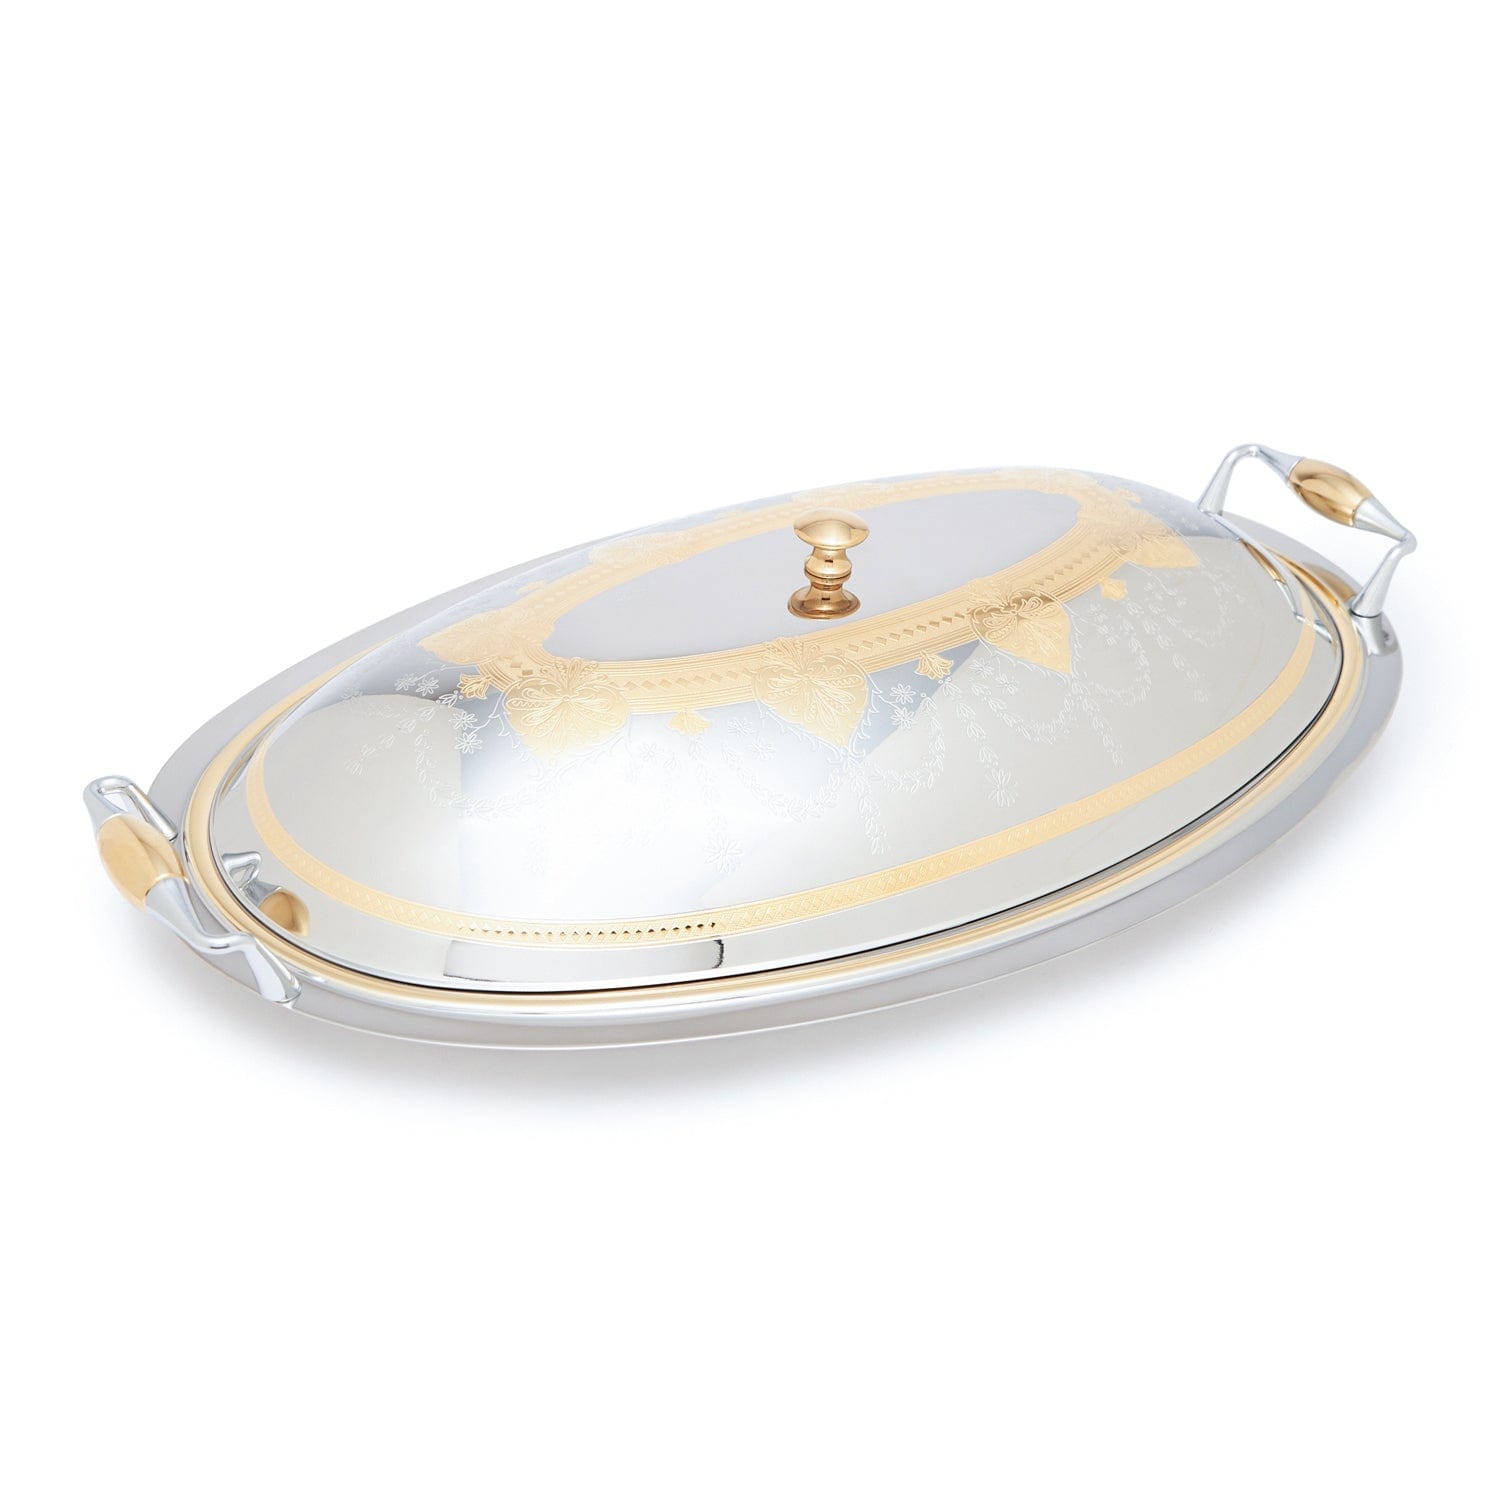 Tresors Laila Gold Oval Risotto - RO-1460/LAI-G